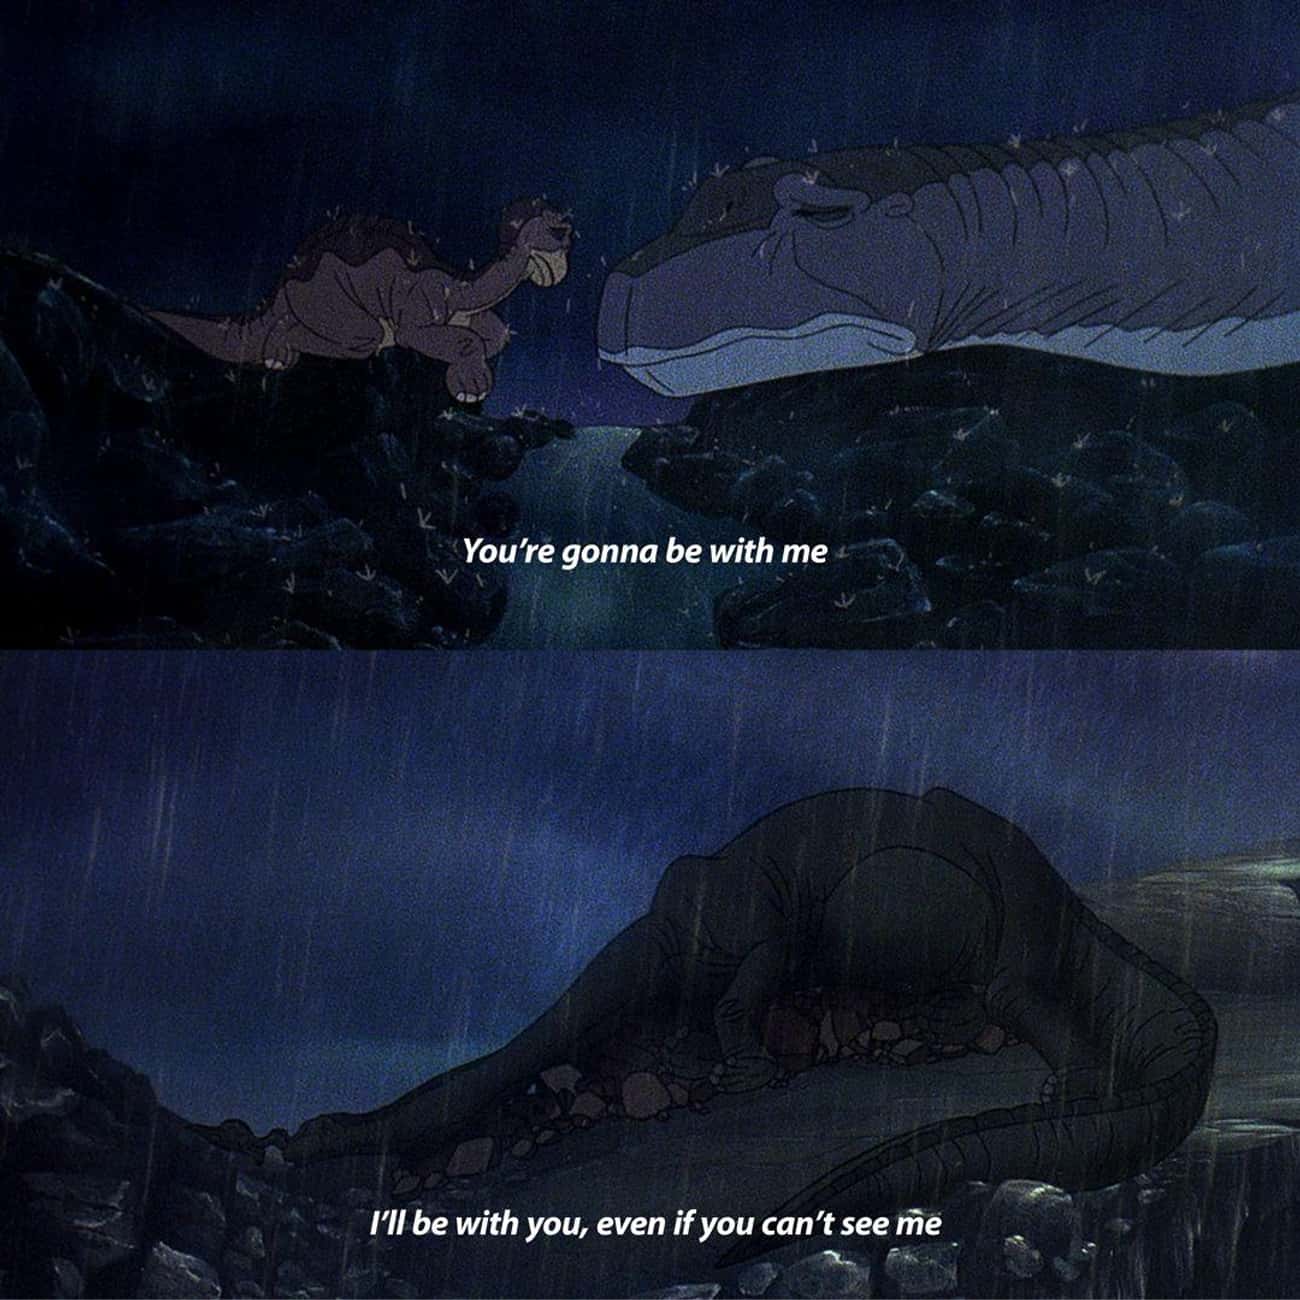 The Death Of Littlefoot's Mom In 'The Land Before Time'